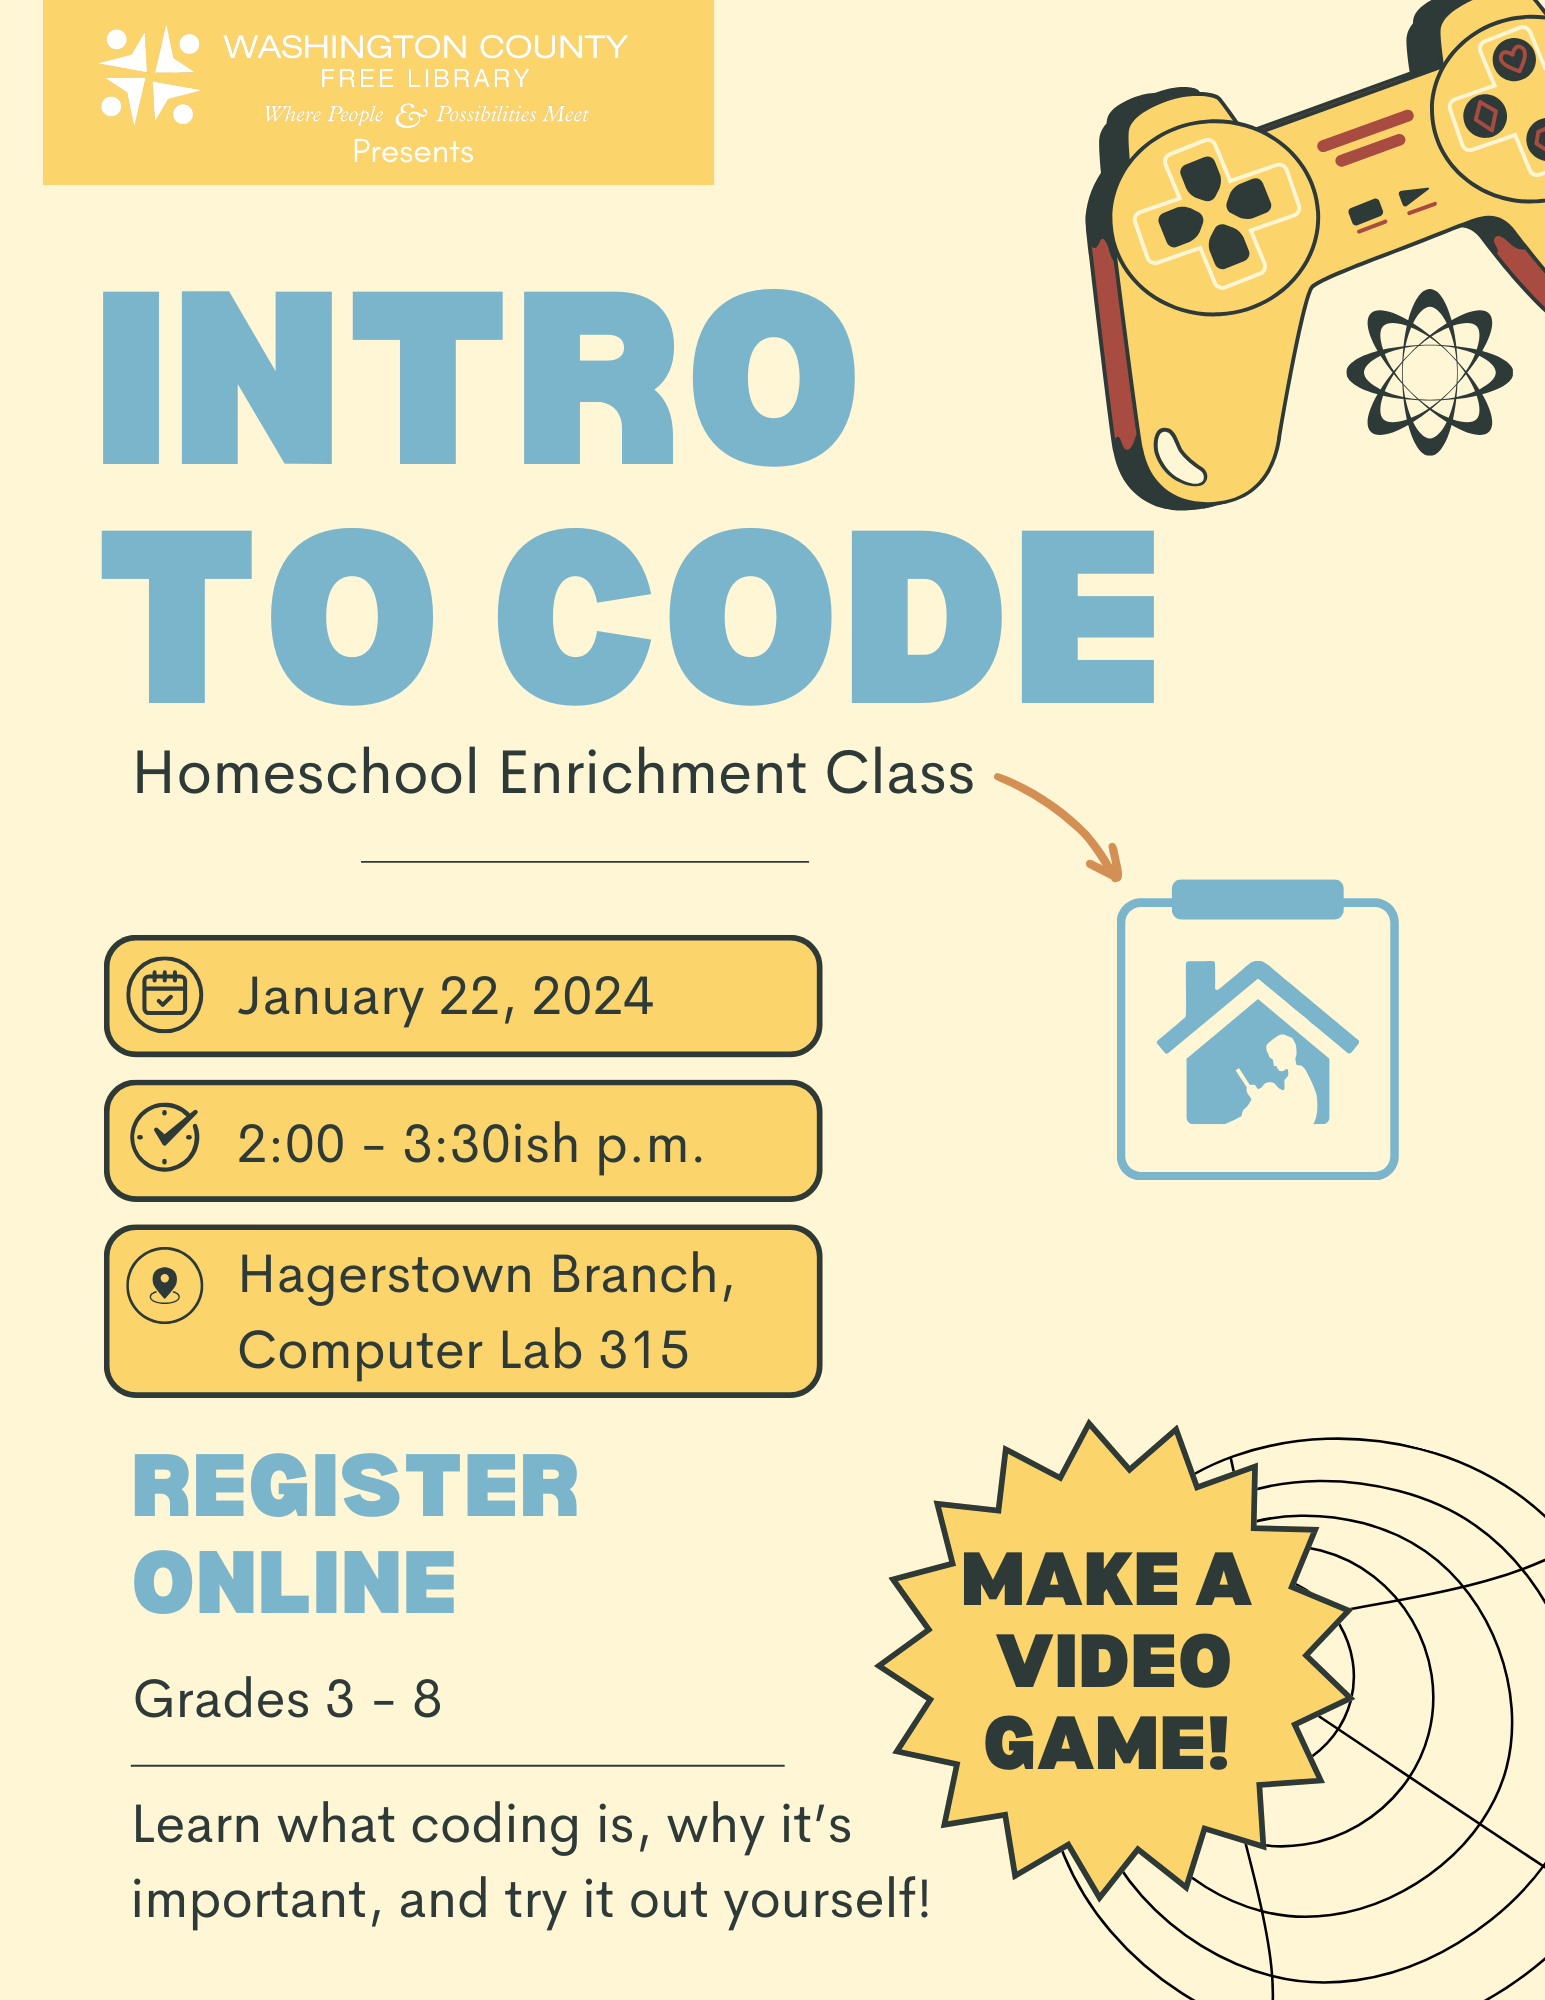 Flyer for Homeschool Enrichment Intro to Code Program. The flyer has a video game controller in the right corner, and gives the date, time and location of the event, which is January 22, 2:00 p.m. in the Computer Lab (Room 315). The program will introduce kids grades 1 to 8 to the concept of coding, and allow them to make their own computer game using Scratch. 